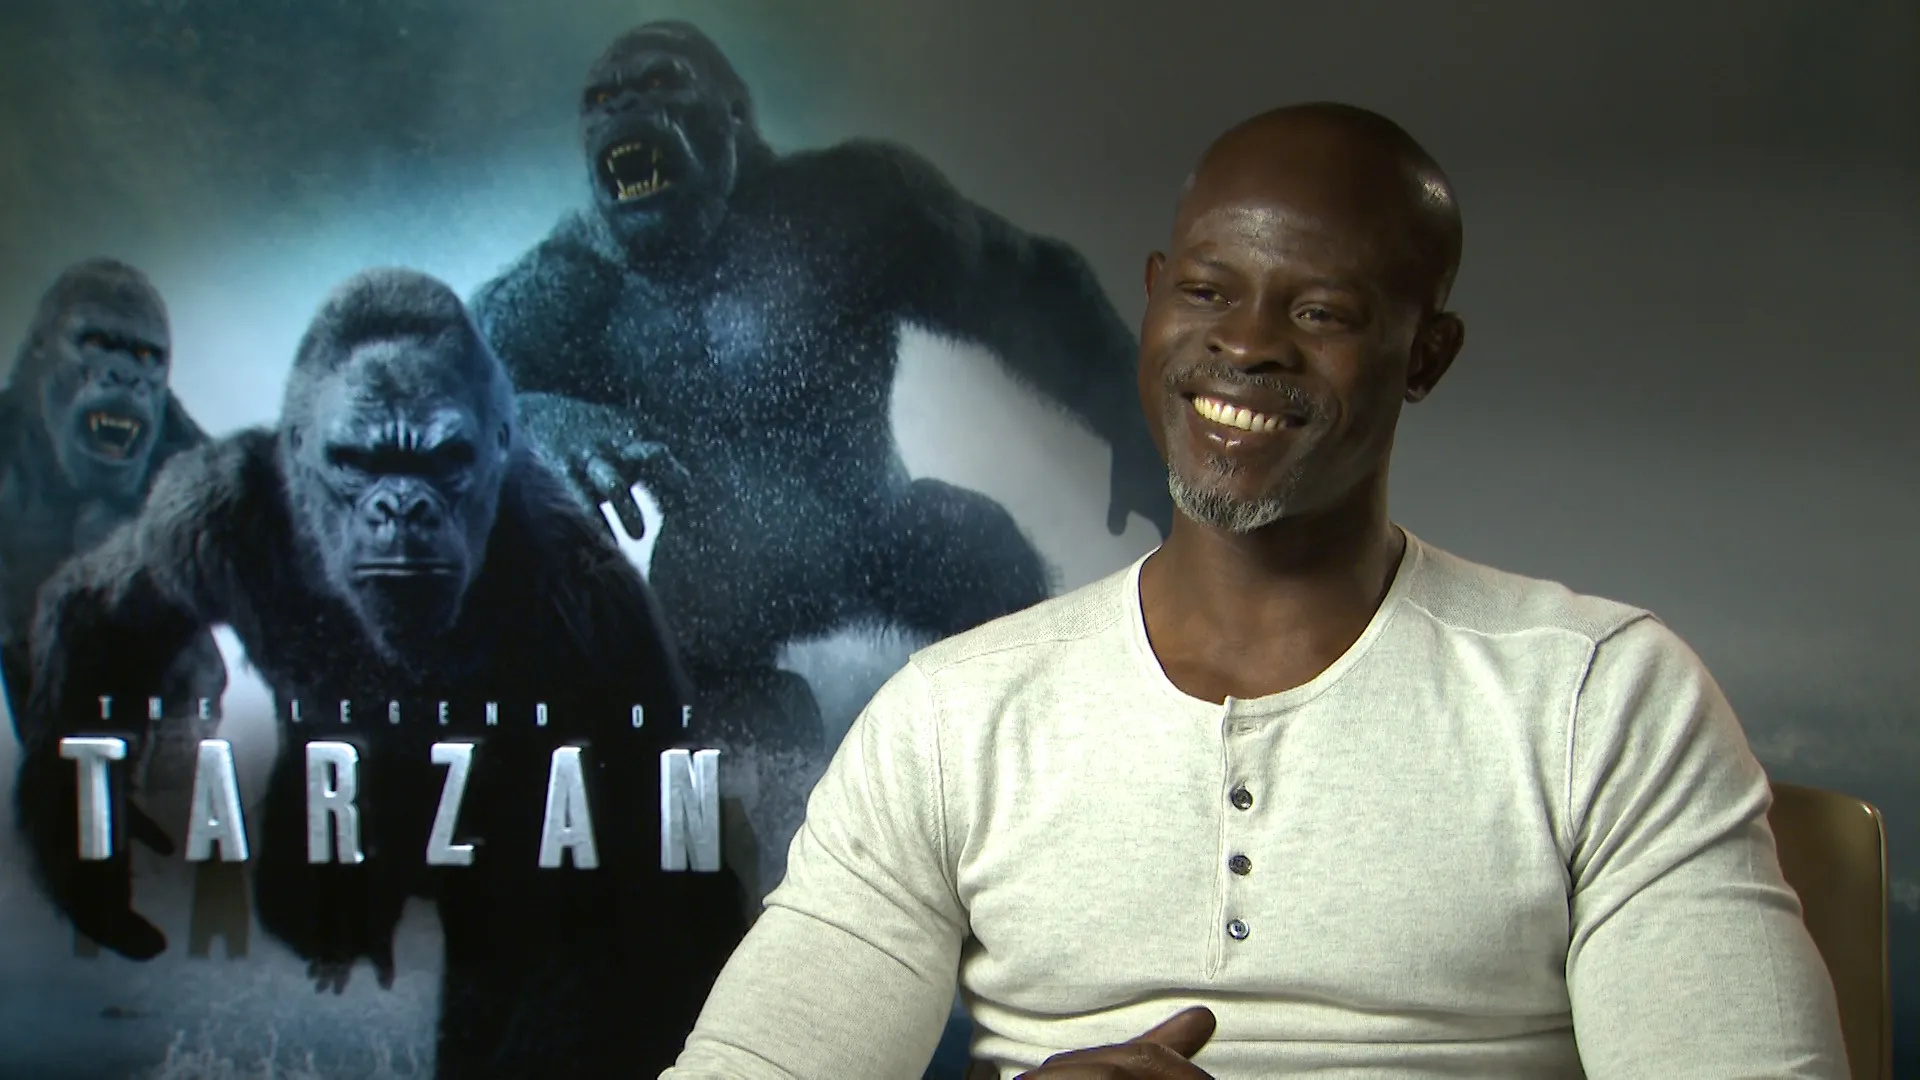 Djimon Hounsou, African storytelling, Hollywood significance, Exclusive interview, 1920x1080 Full HD Desktop